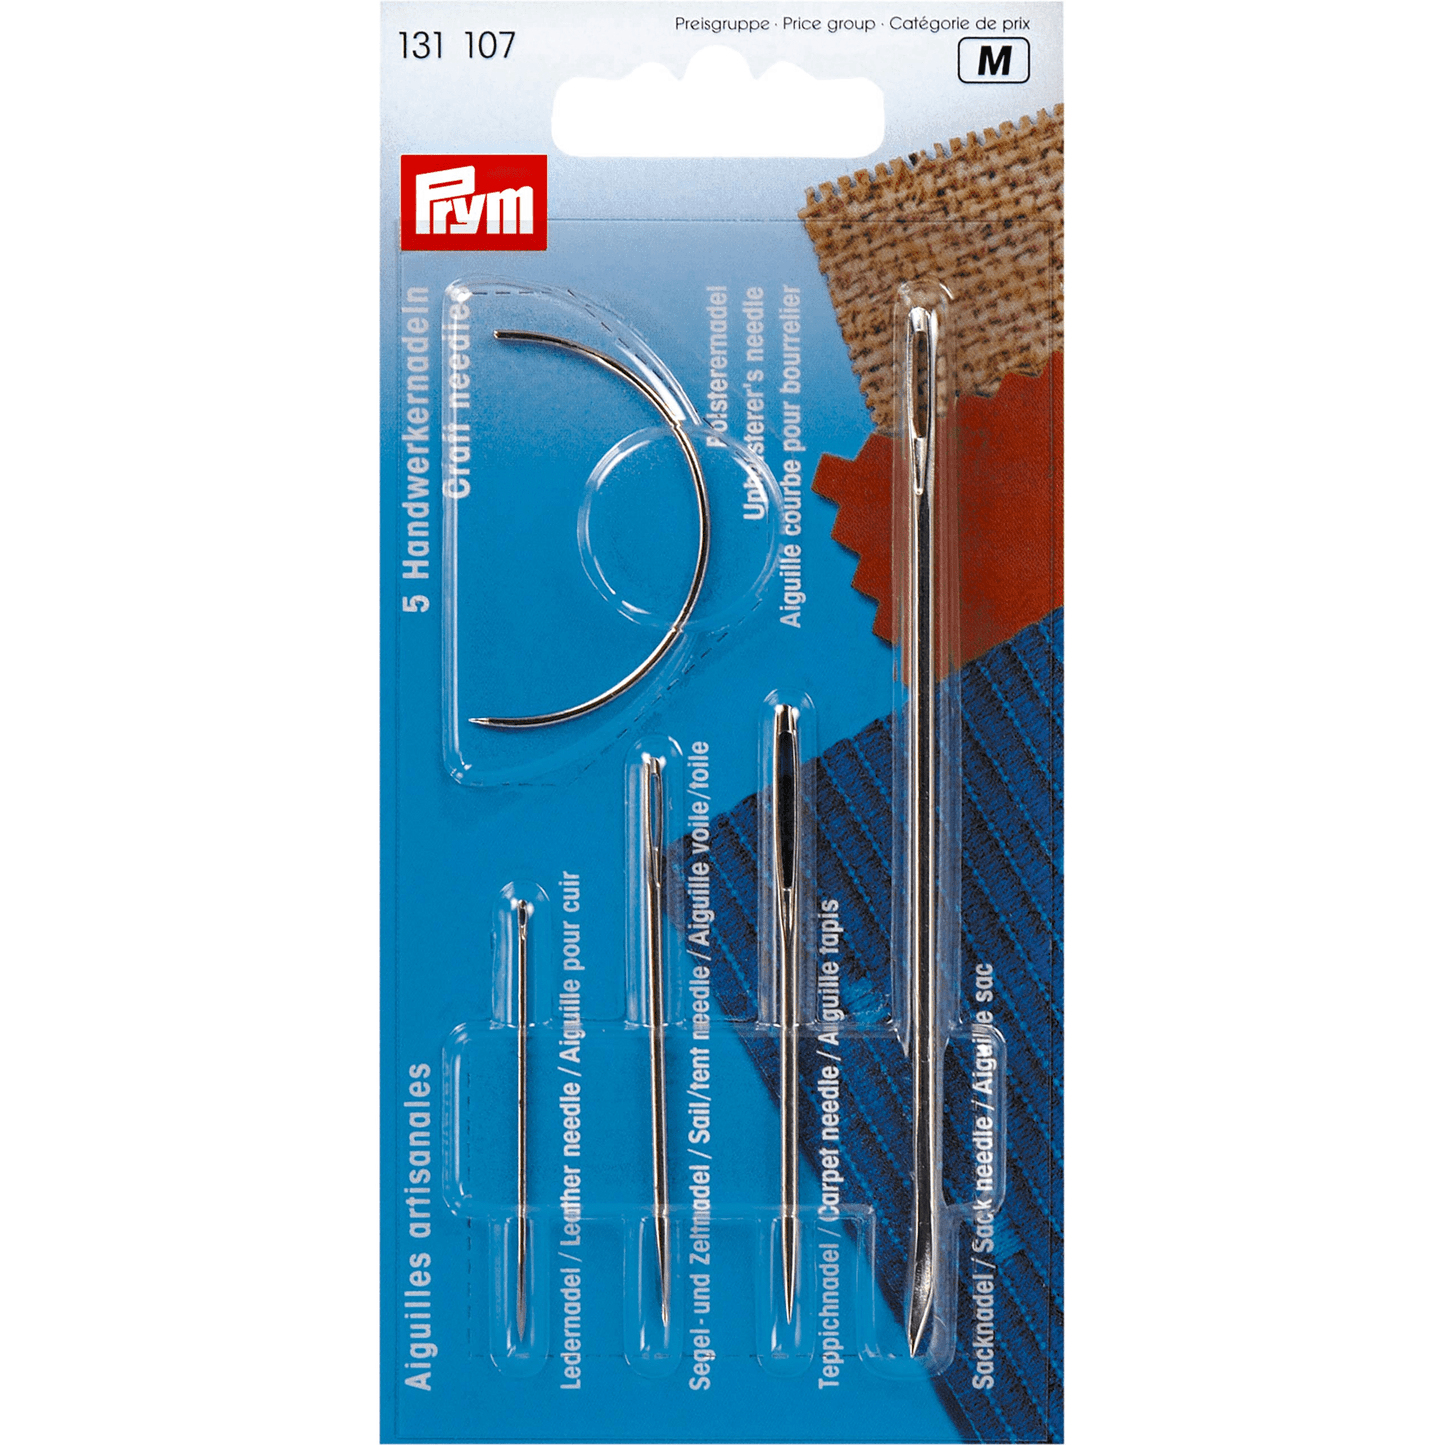 Prym Craft Needles - 5 in a pack . - 131 107